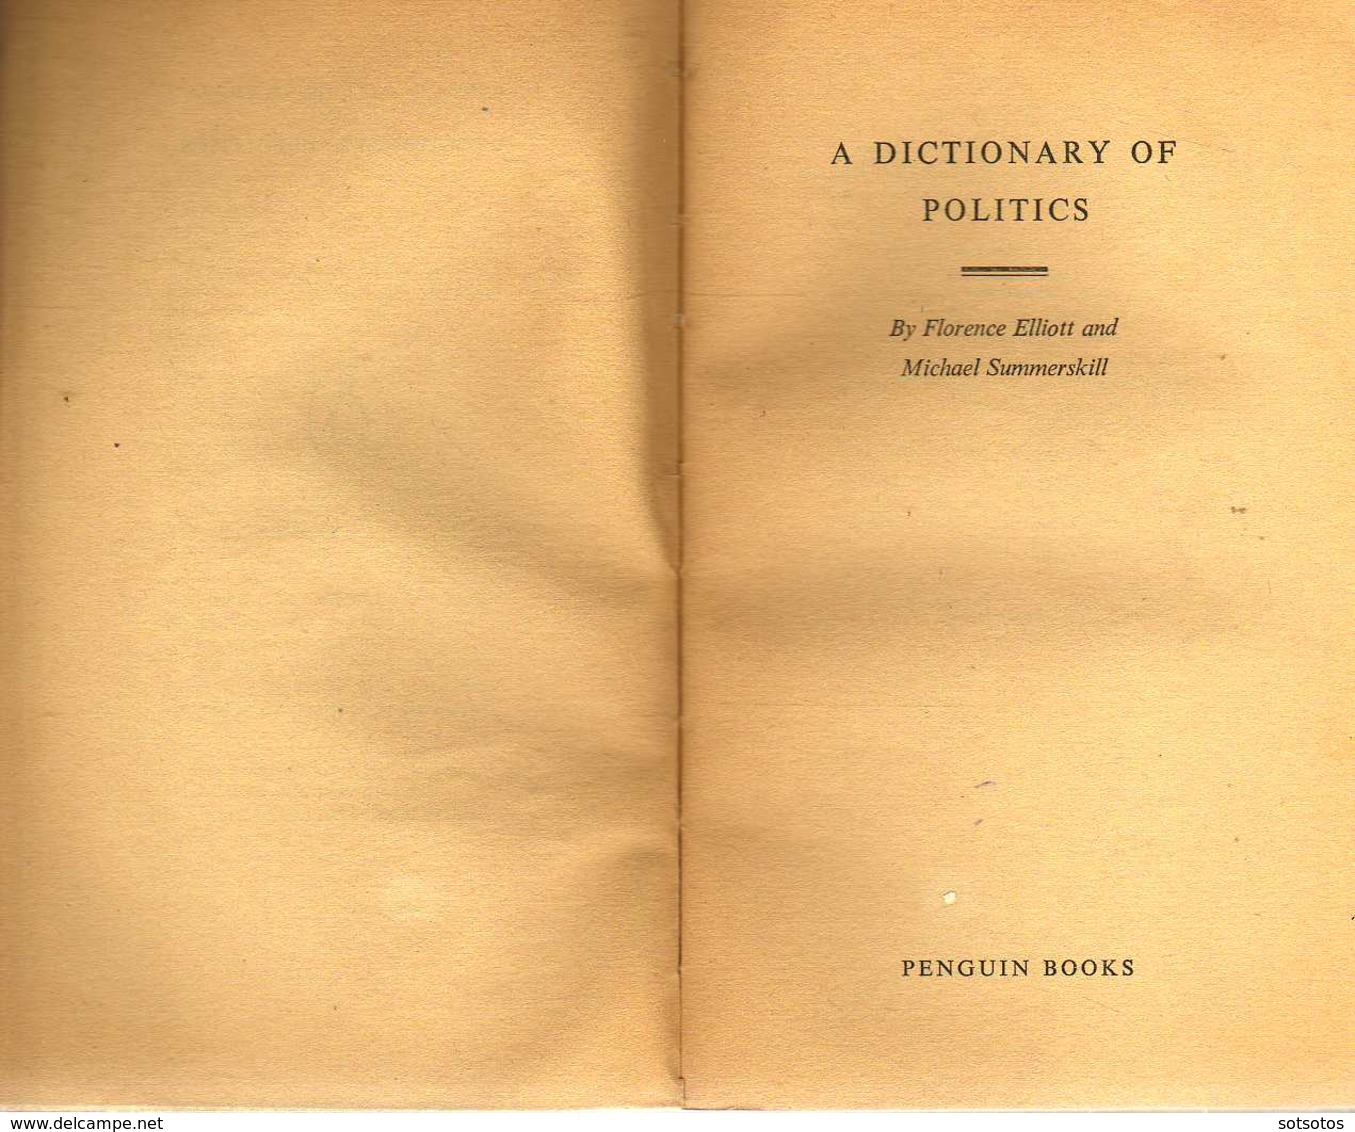 A DICTIONNARY  Of POLITICS:  Florence ELLIOTT And Michael SUMMERSKILL  - Ed. PENGUIN BOOKS, G.B. (1959), 352 Pages (11X1 - Dictionaries, Thesauri